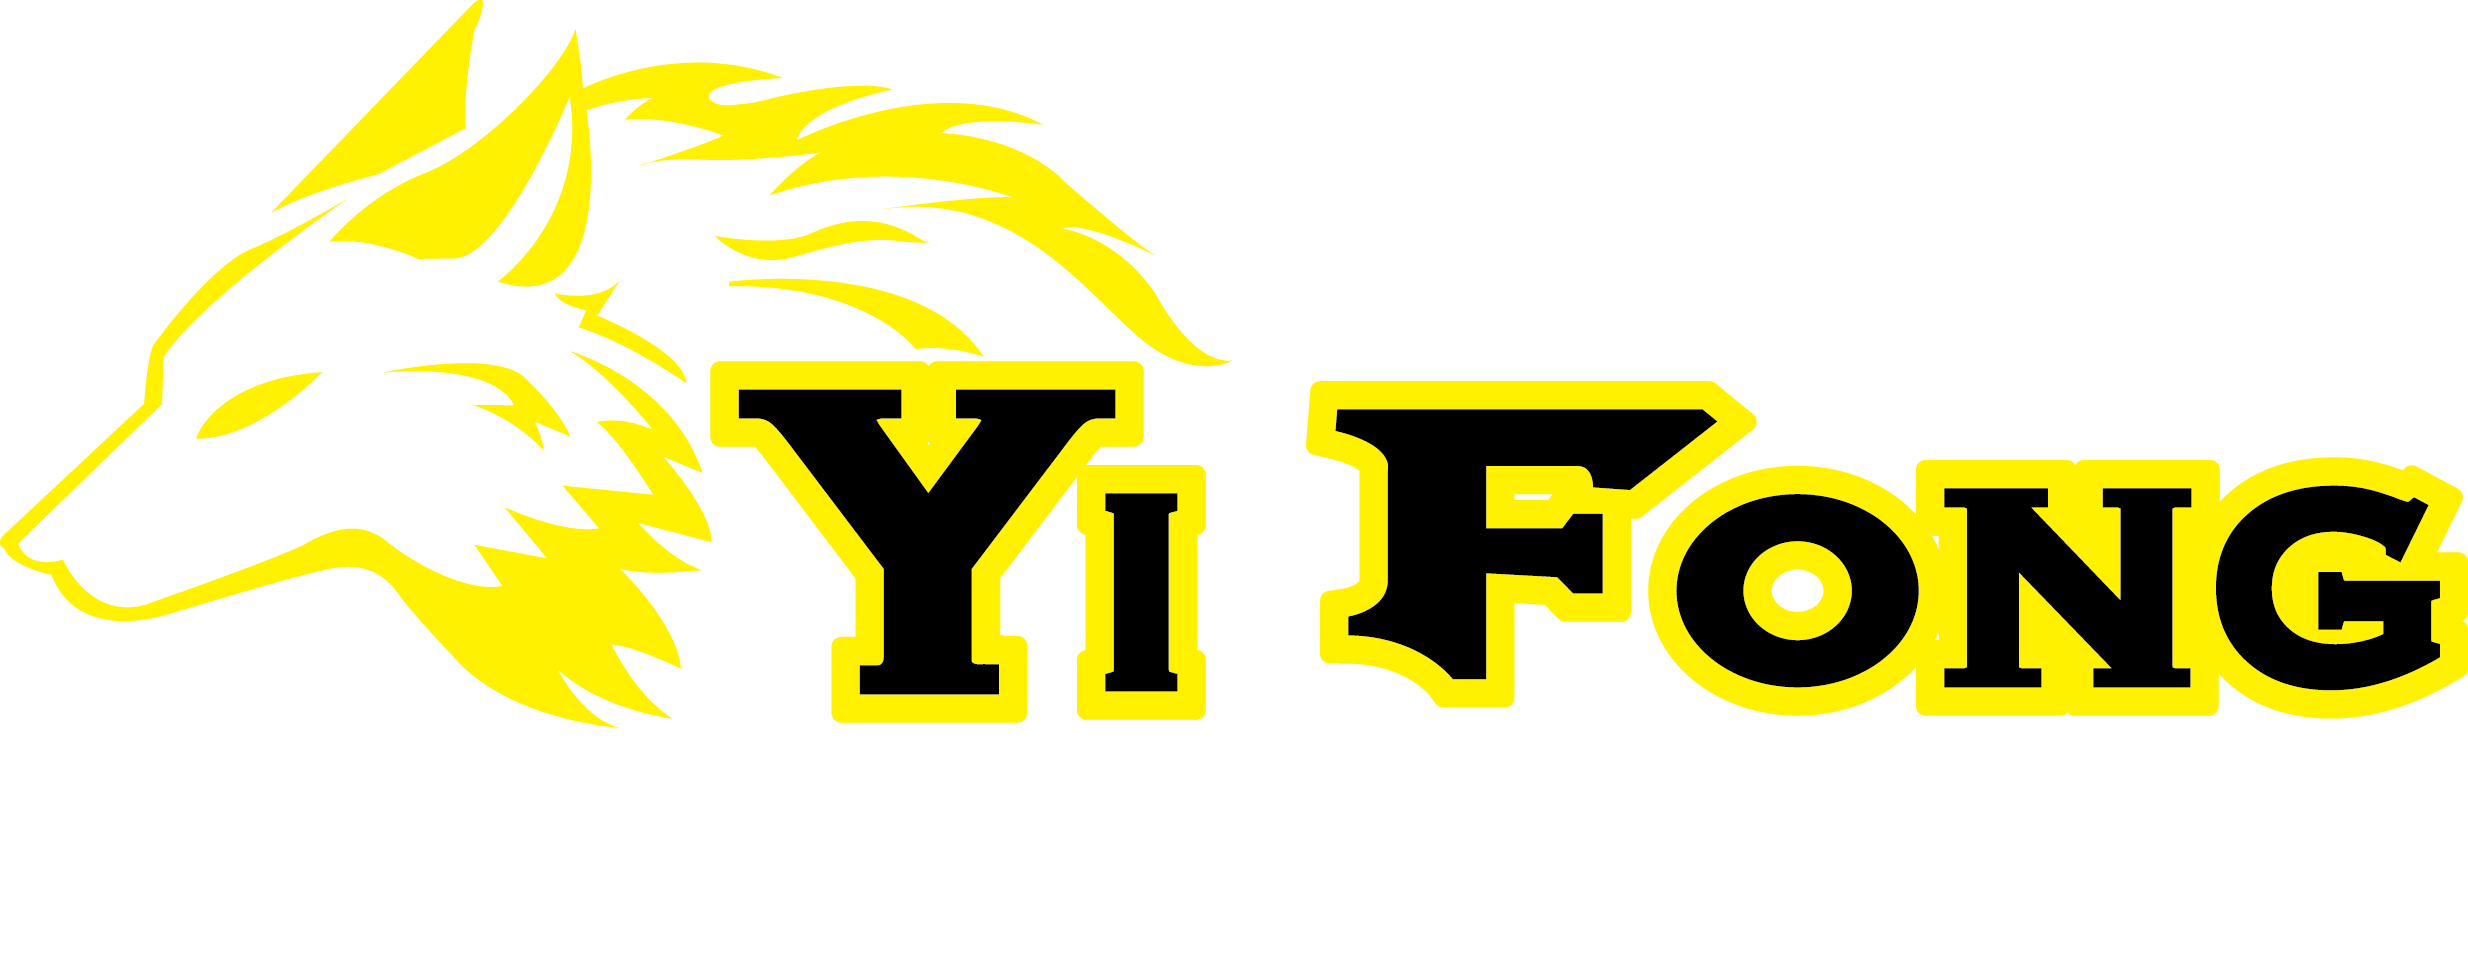 YI FONG INDUSTRIAL SAFETY PRODUCTS CO LTD